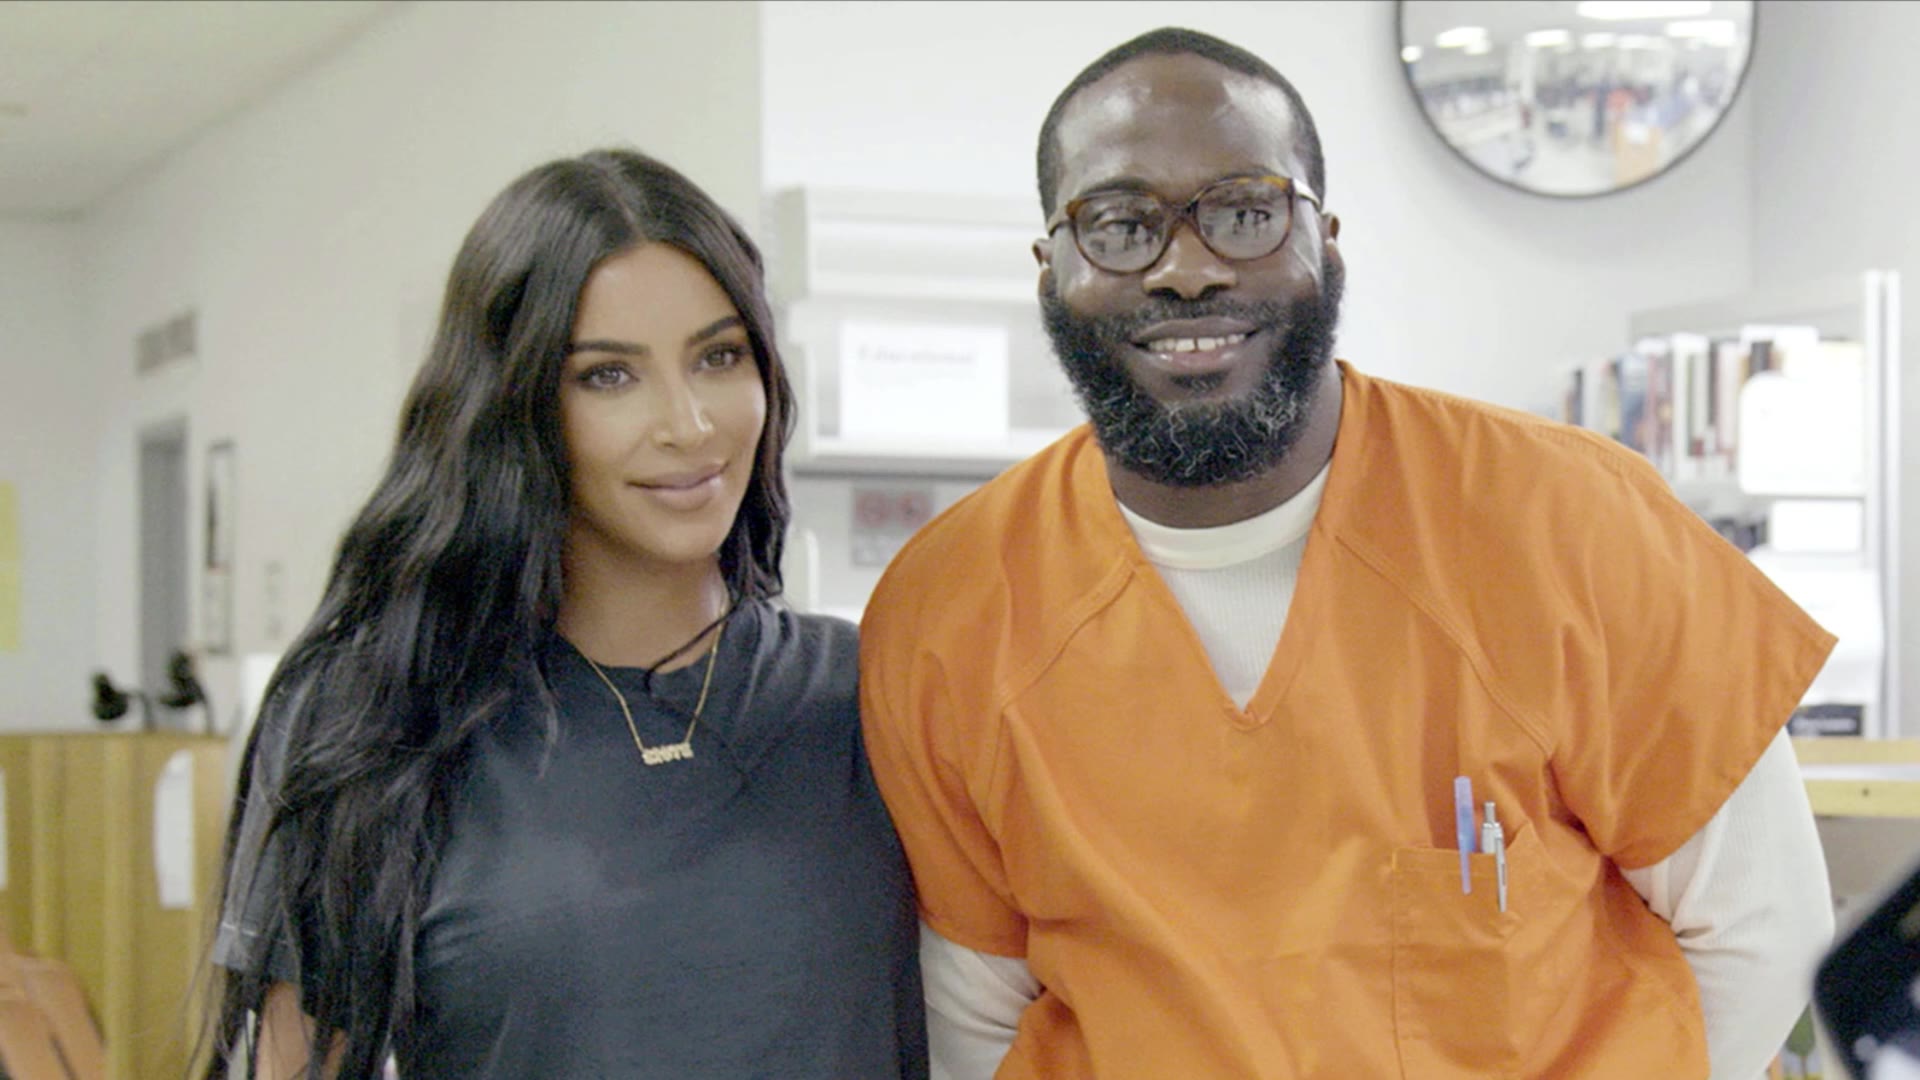 “I’ve Been Resurrected:” Inmate Championed Kim Kardashian West Released After Life Sentence Suspended